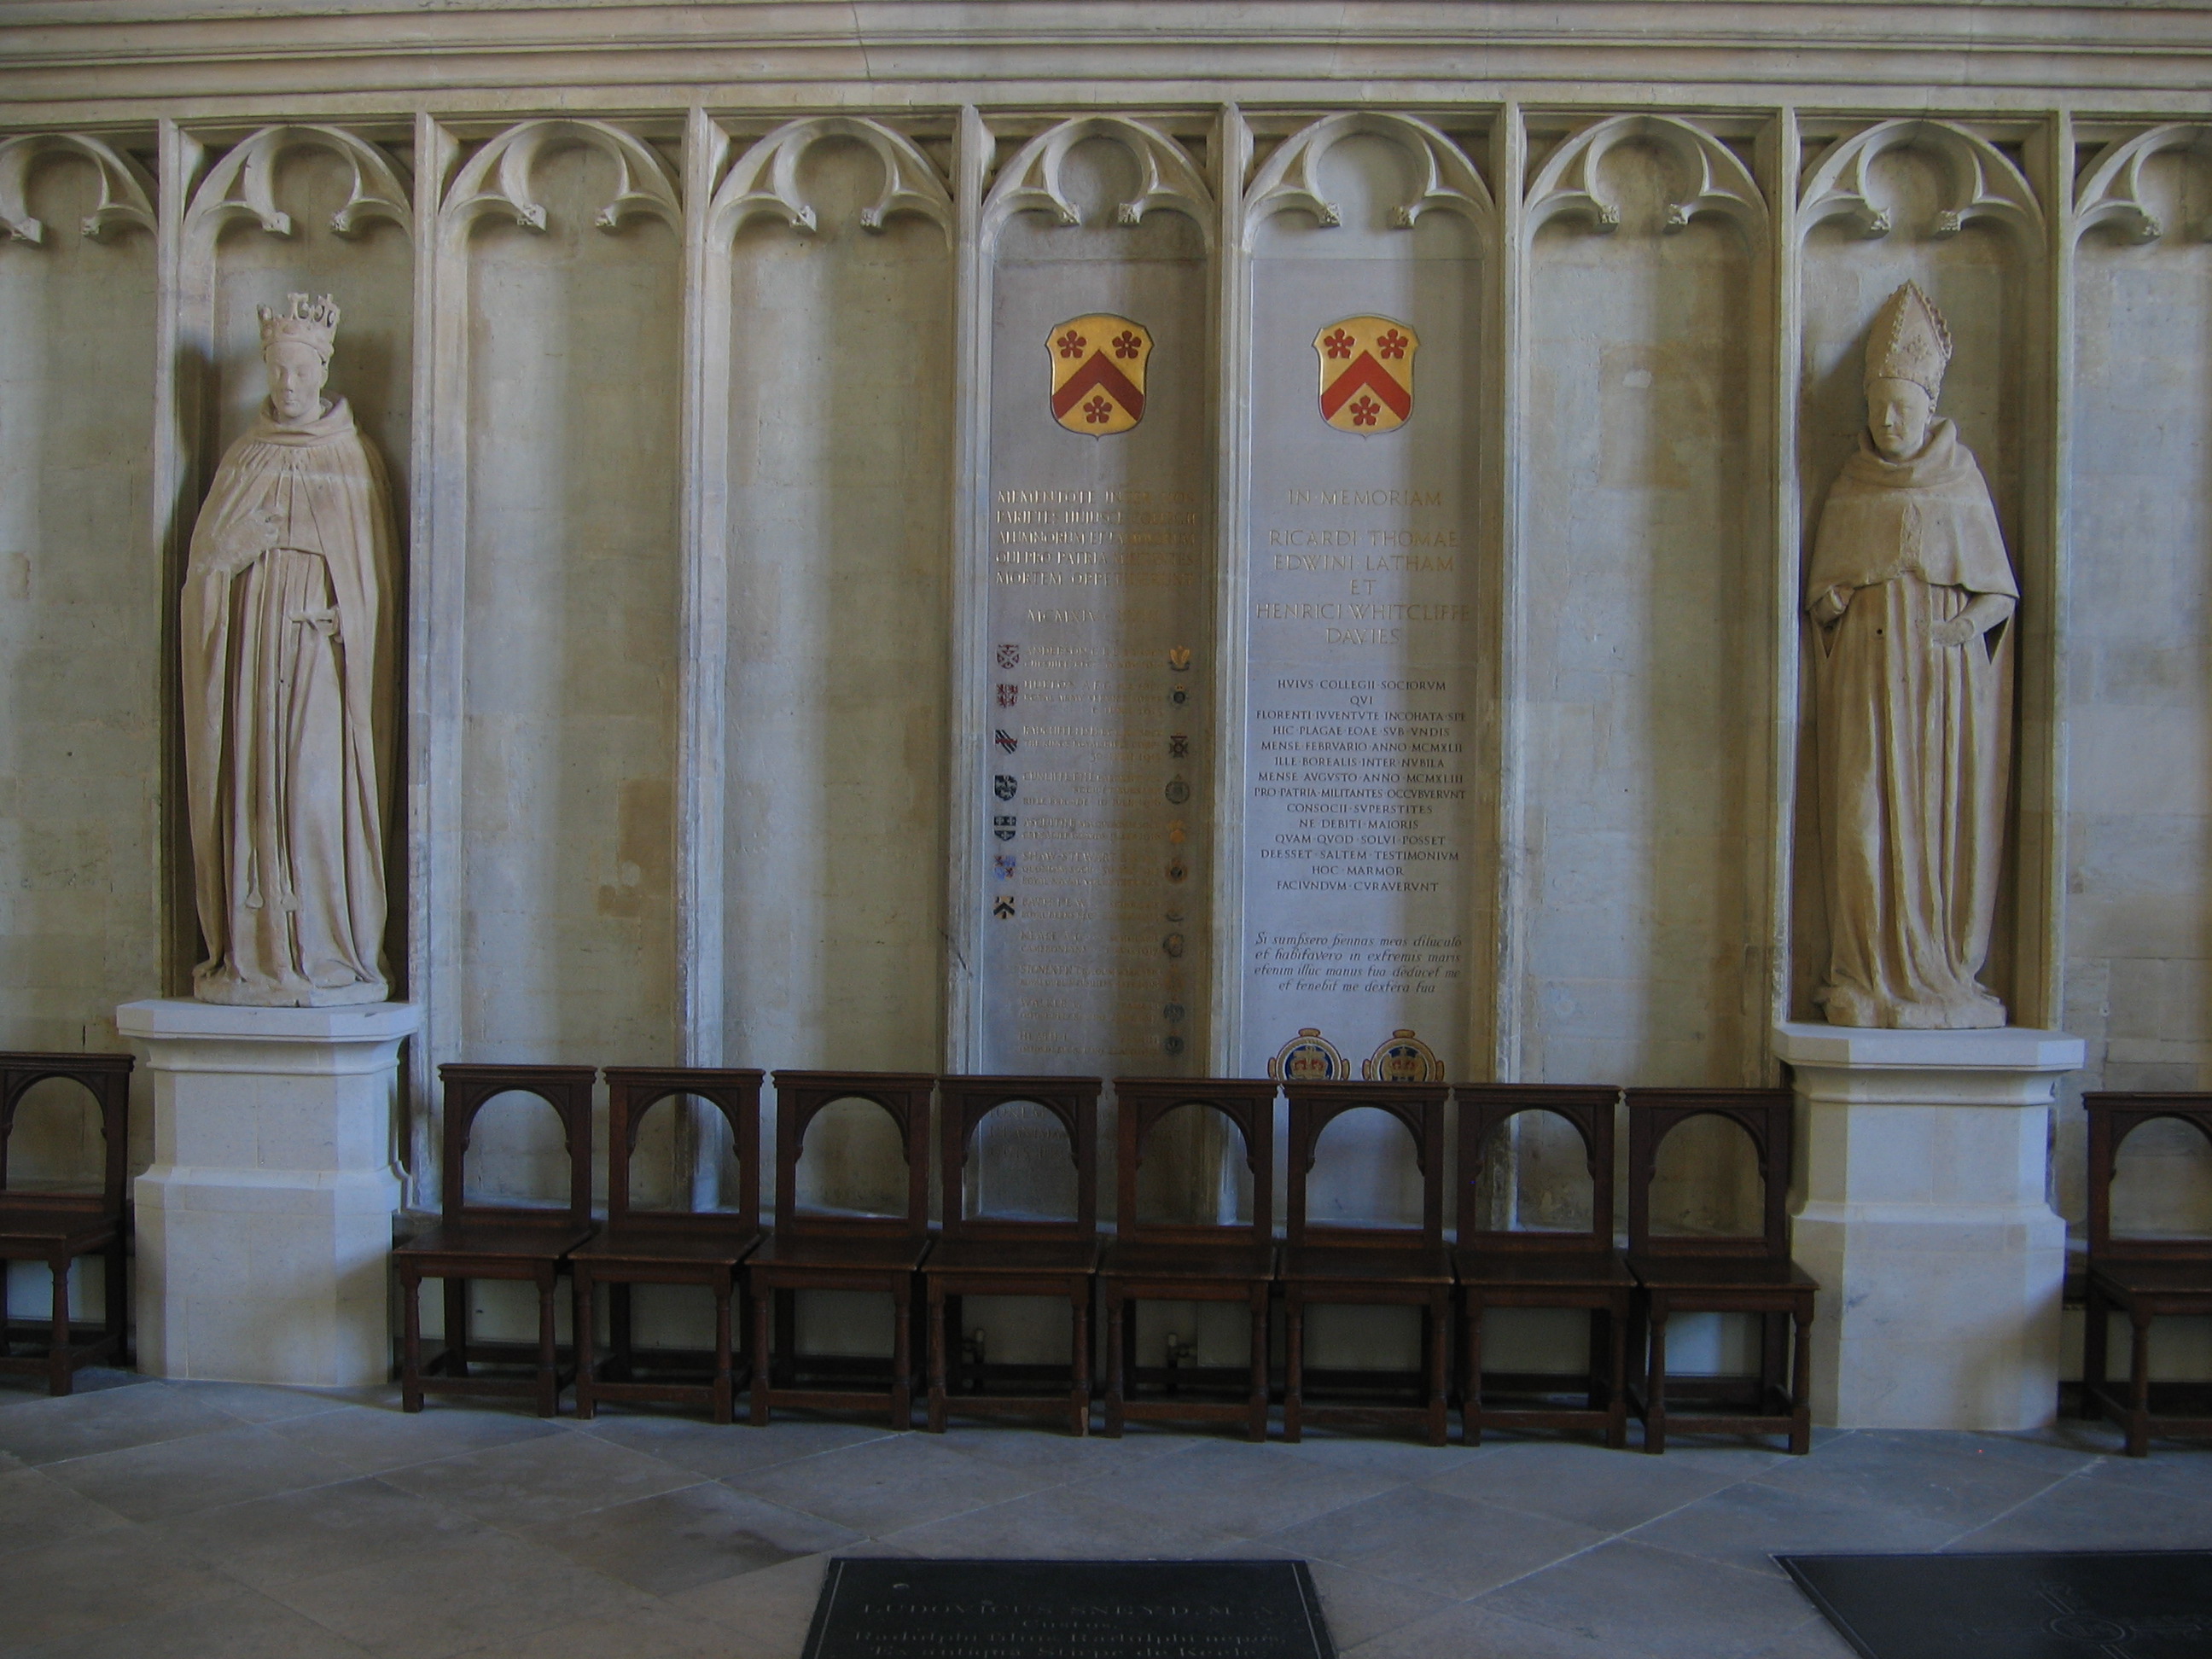 war memorials in the College chapel - WWI on left, WW2 on right